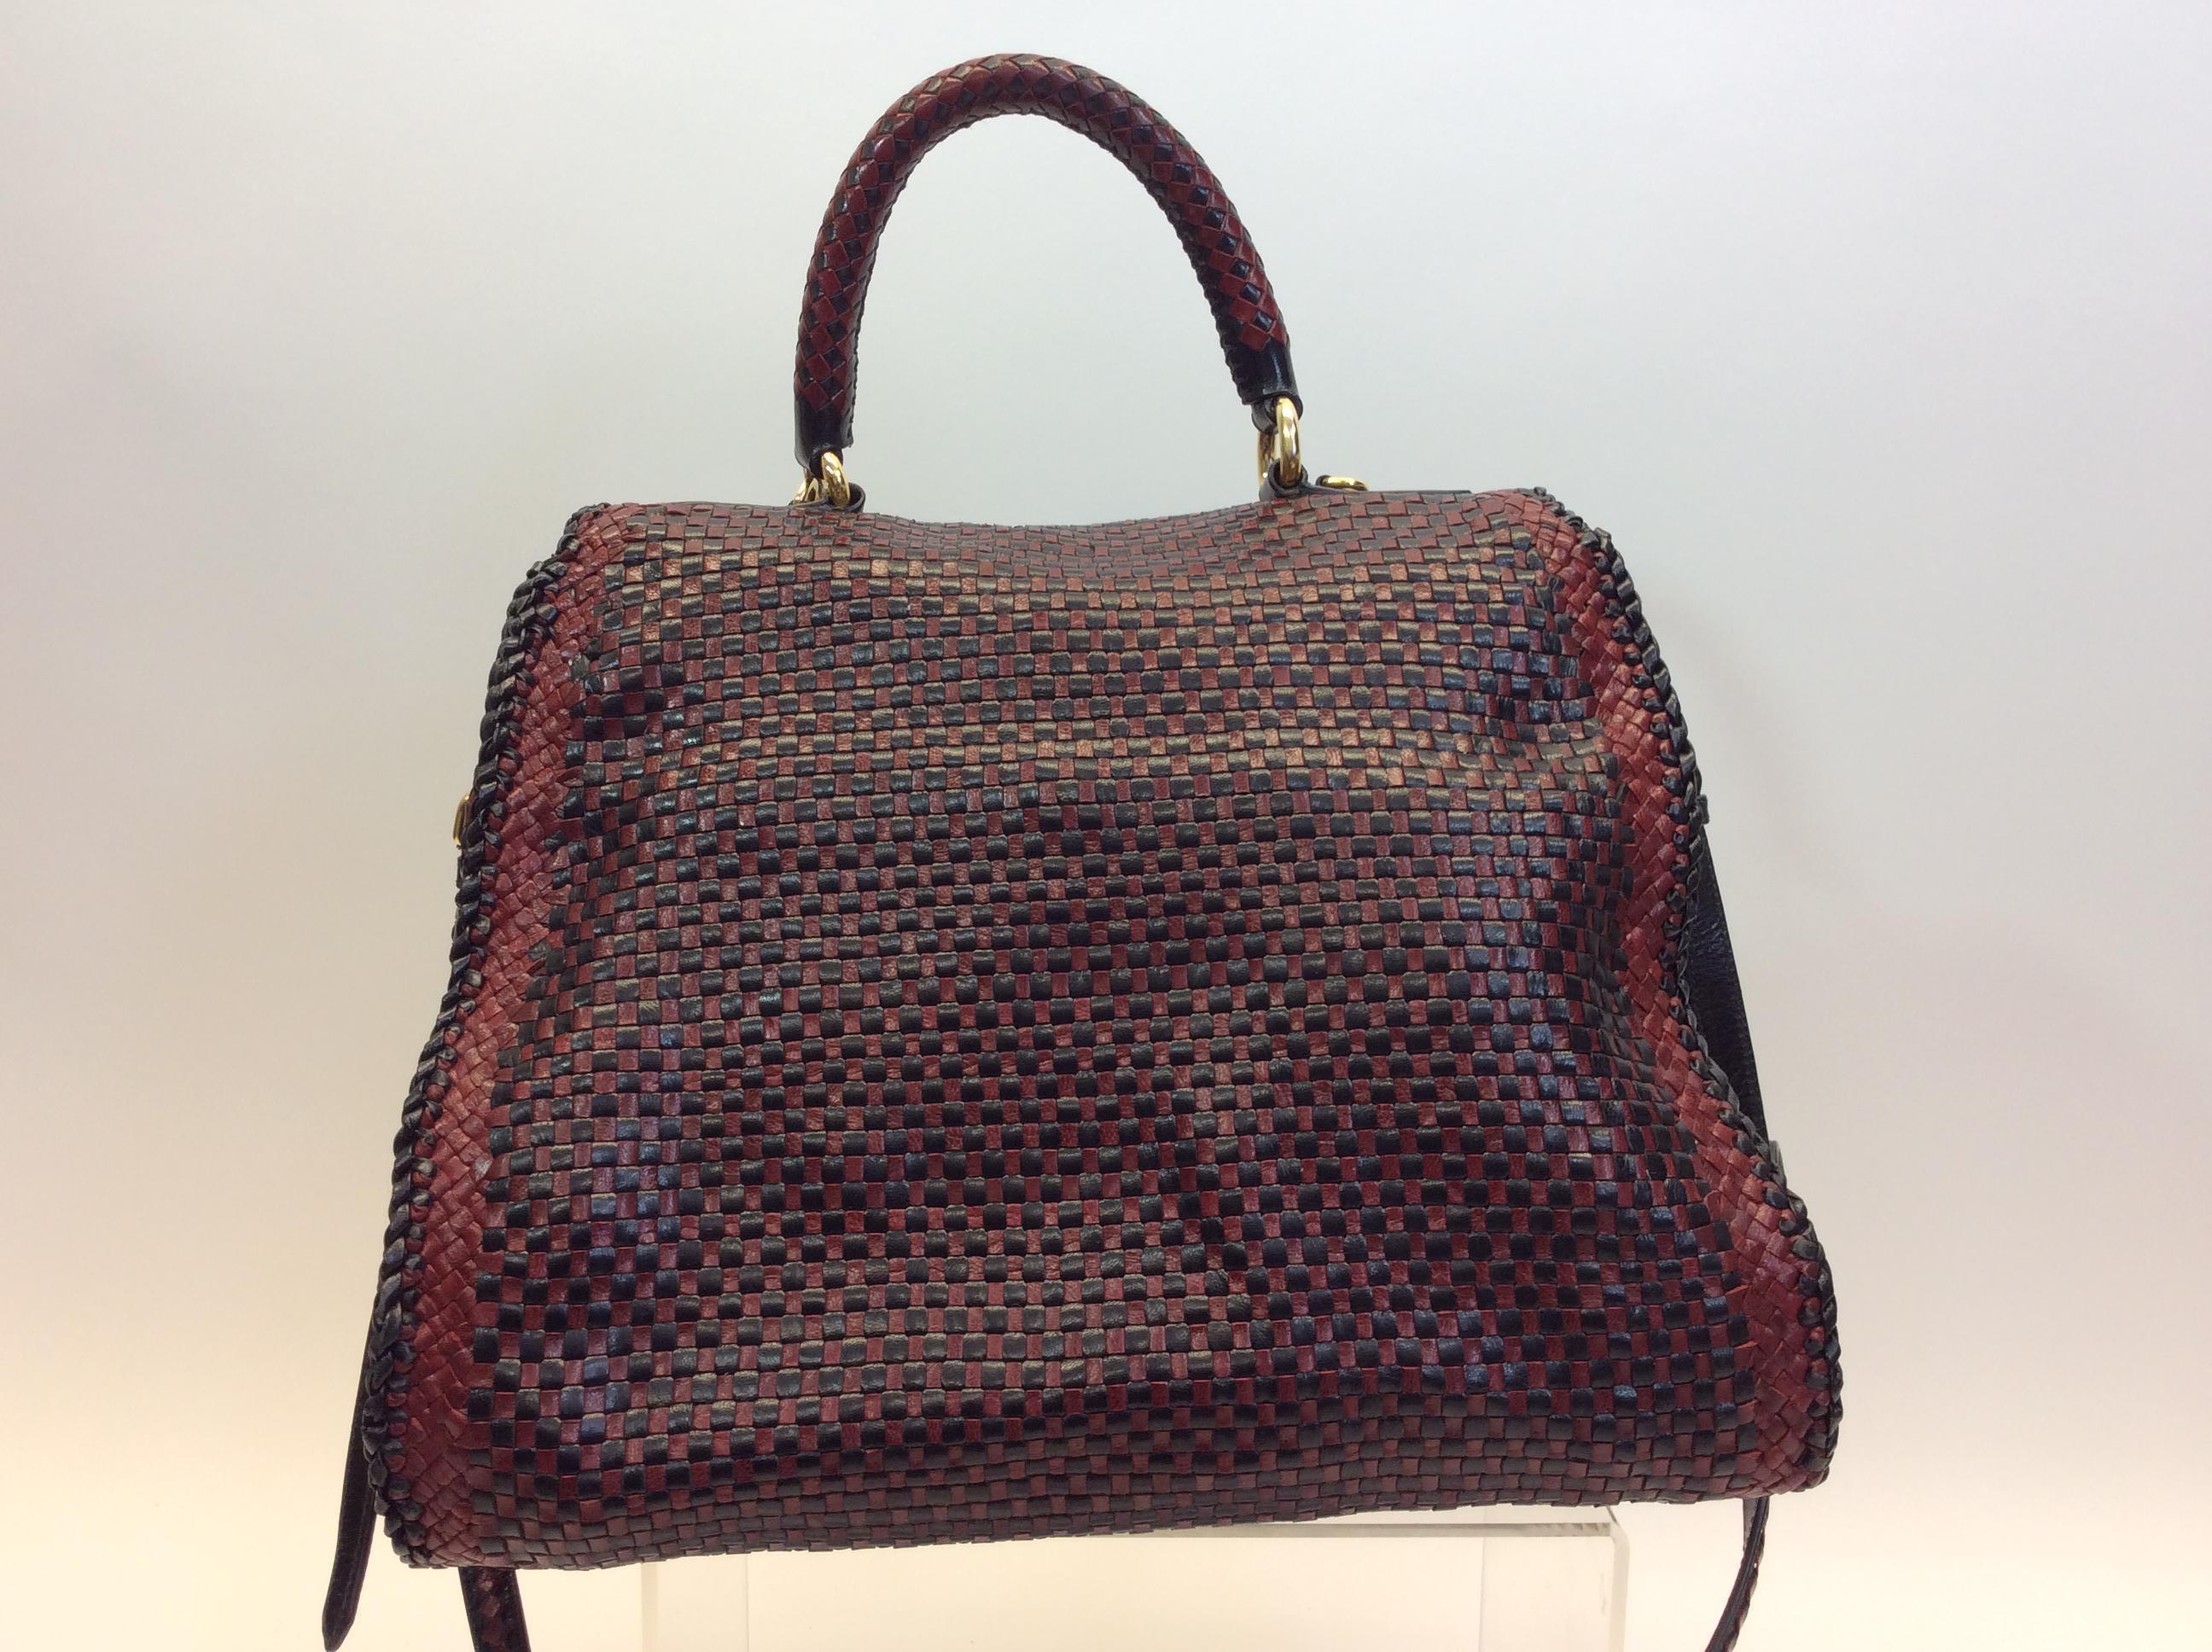 Prada Black and Red Woven Leather Satchel In Good Condition For Sale In Narberth, PA